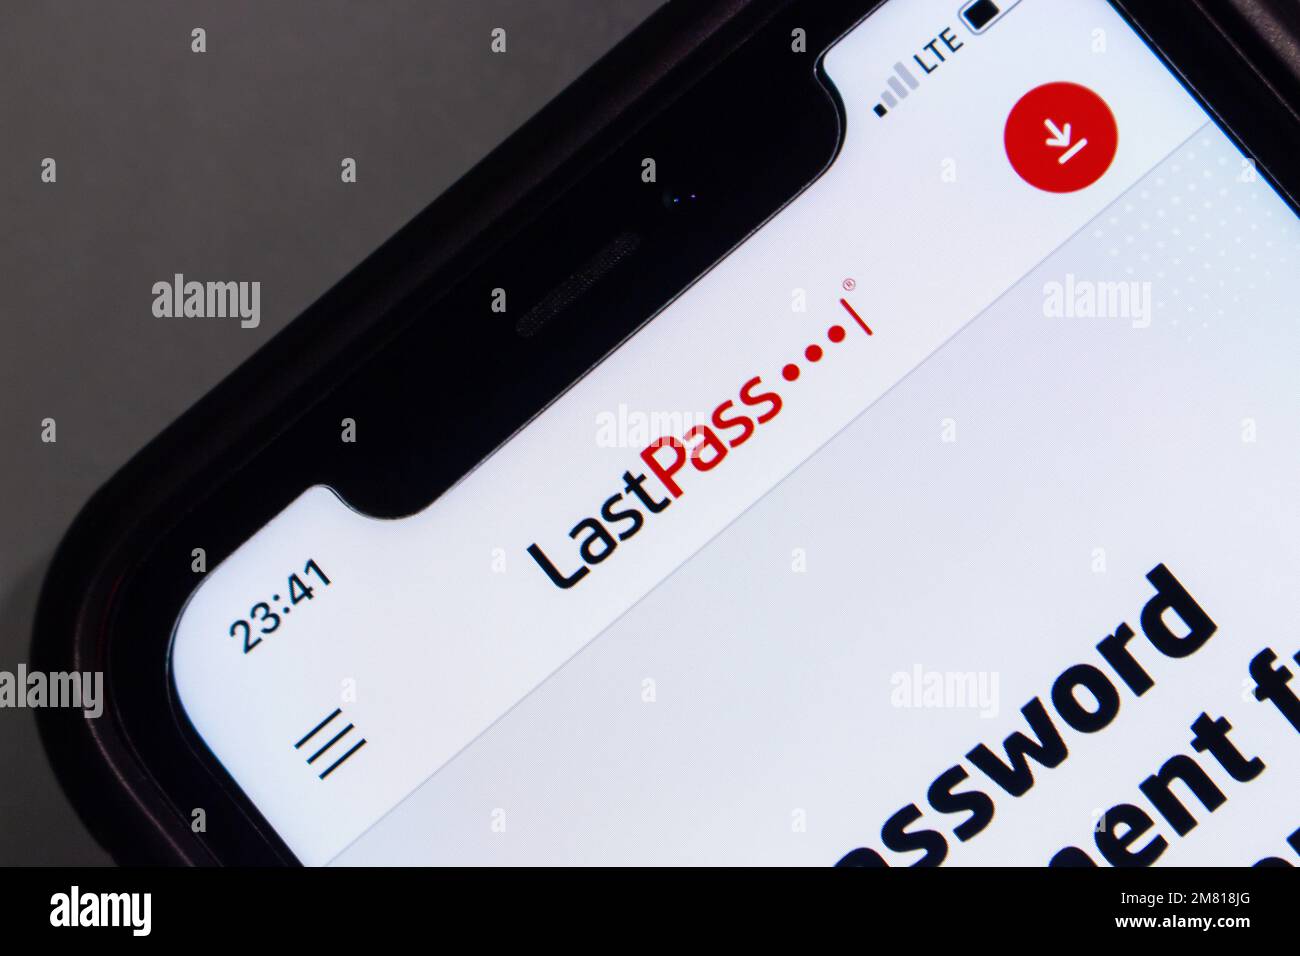 Logo of LastPass in its website on iPhone. LastPass is a password manager distributed in subscription form & freemium model with limited functionality Stock Photo